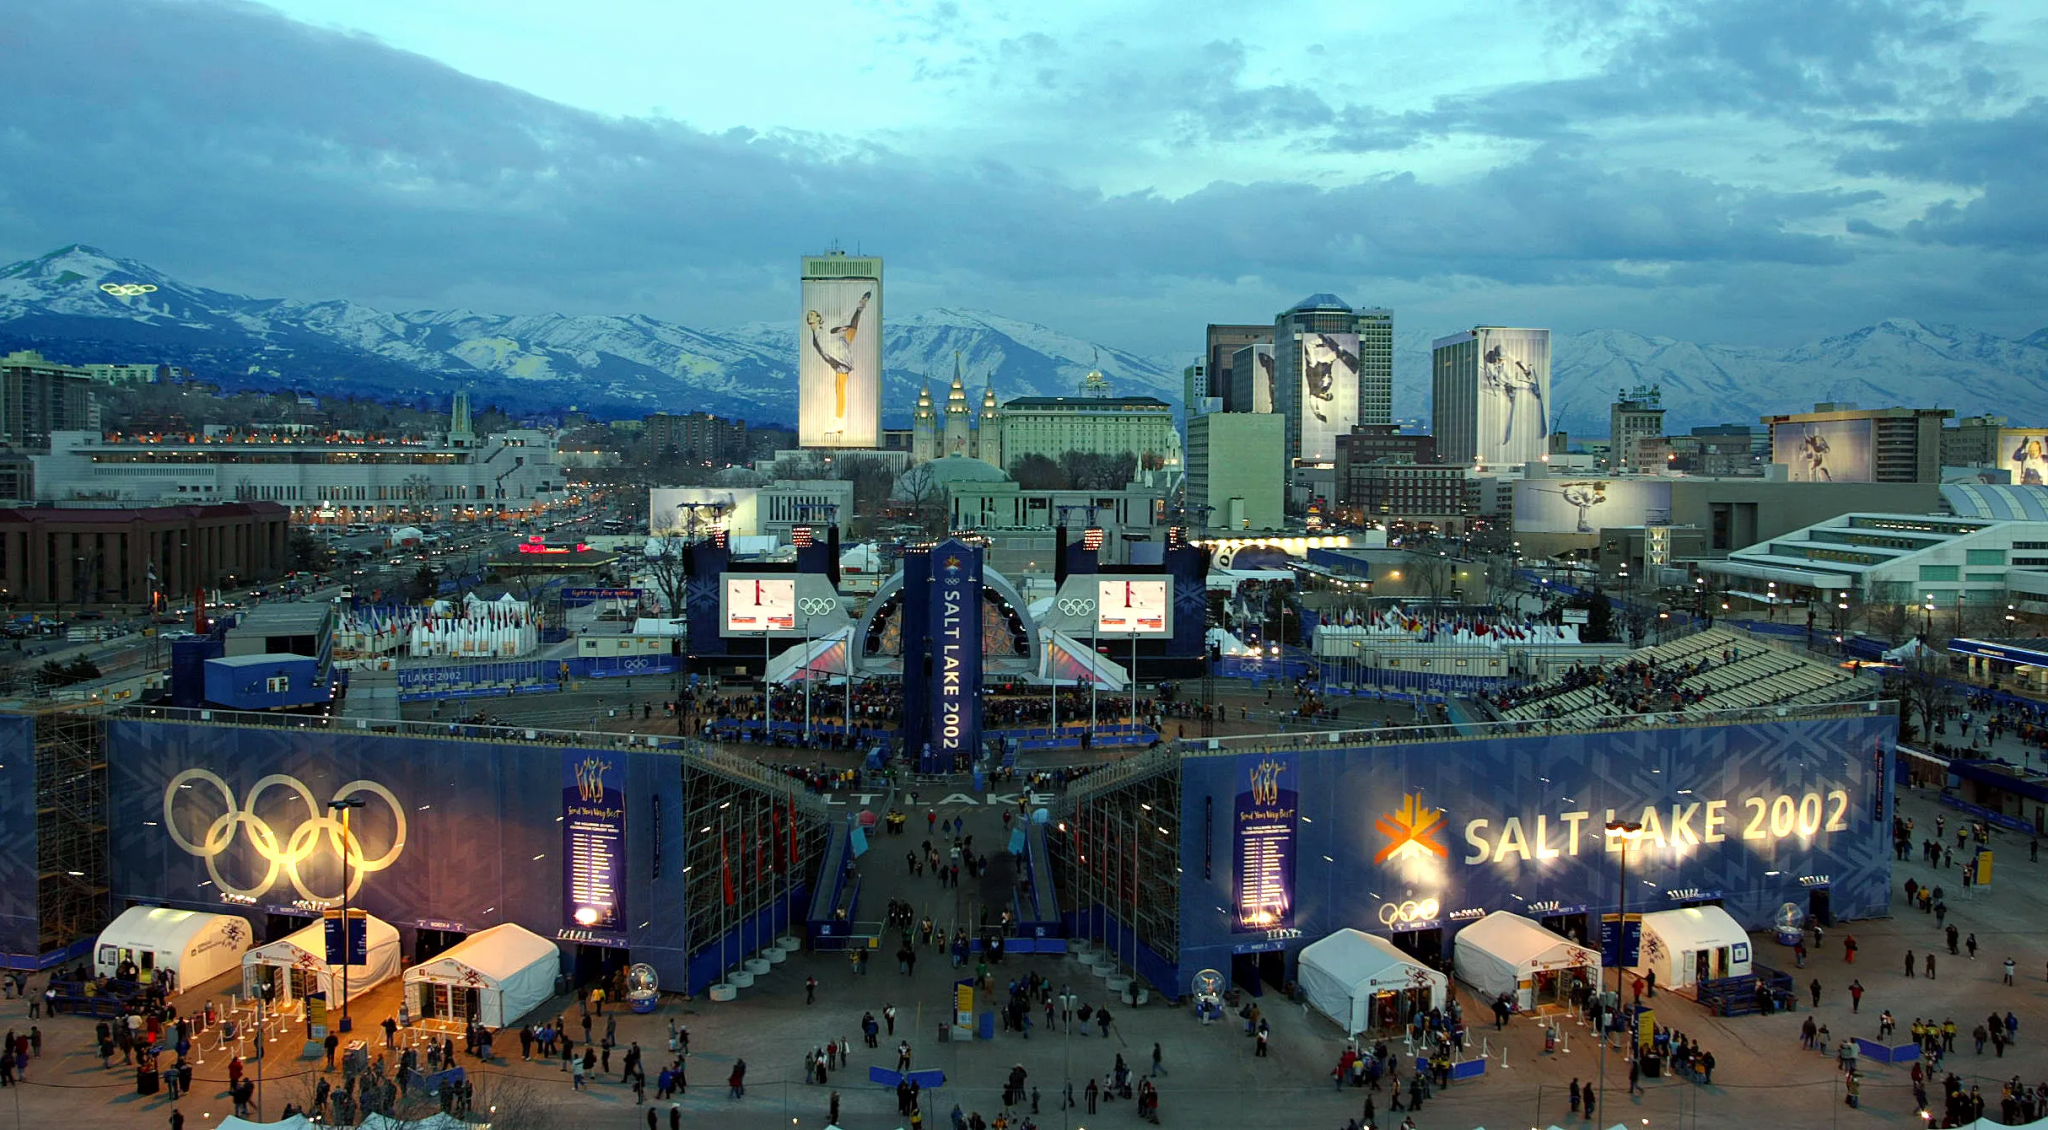 Salt Lake City, host of the 2002 Winter Olympic Games, looks likely to be given the opportunity to stage them again in 2034 ©Getty Images